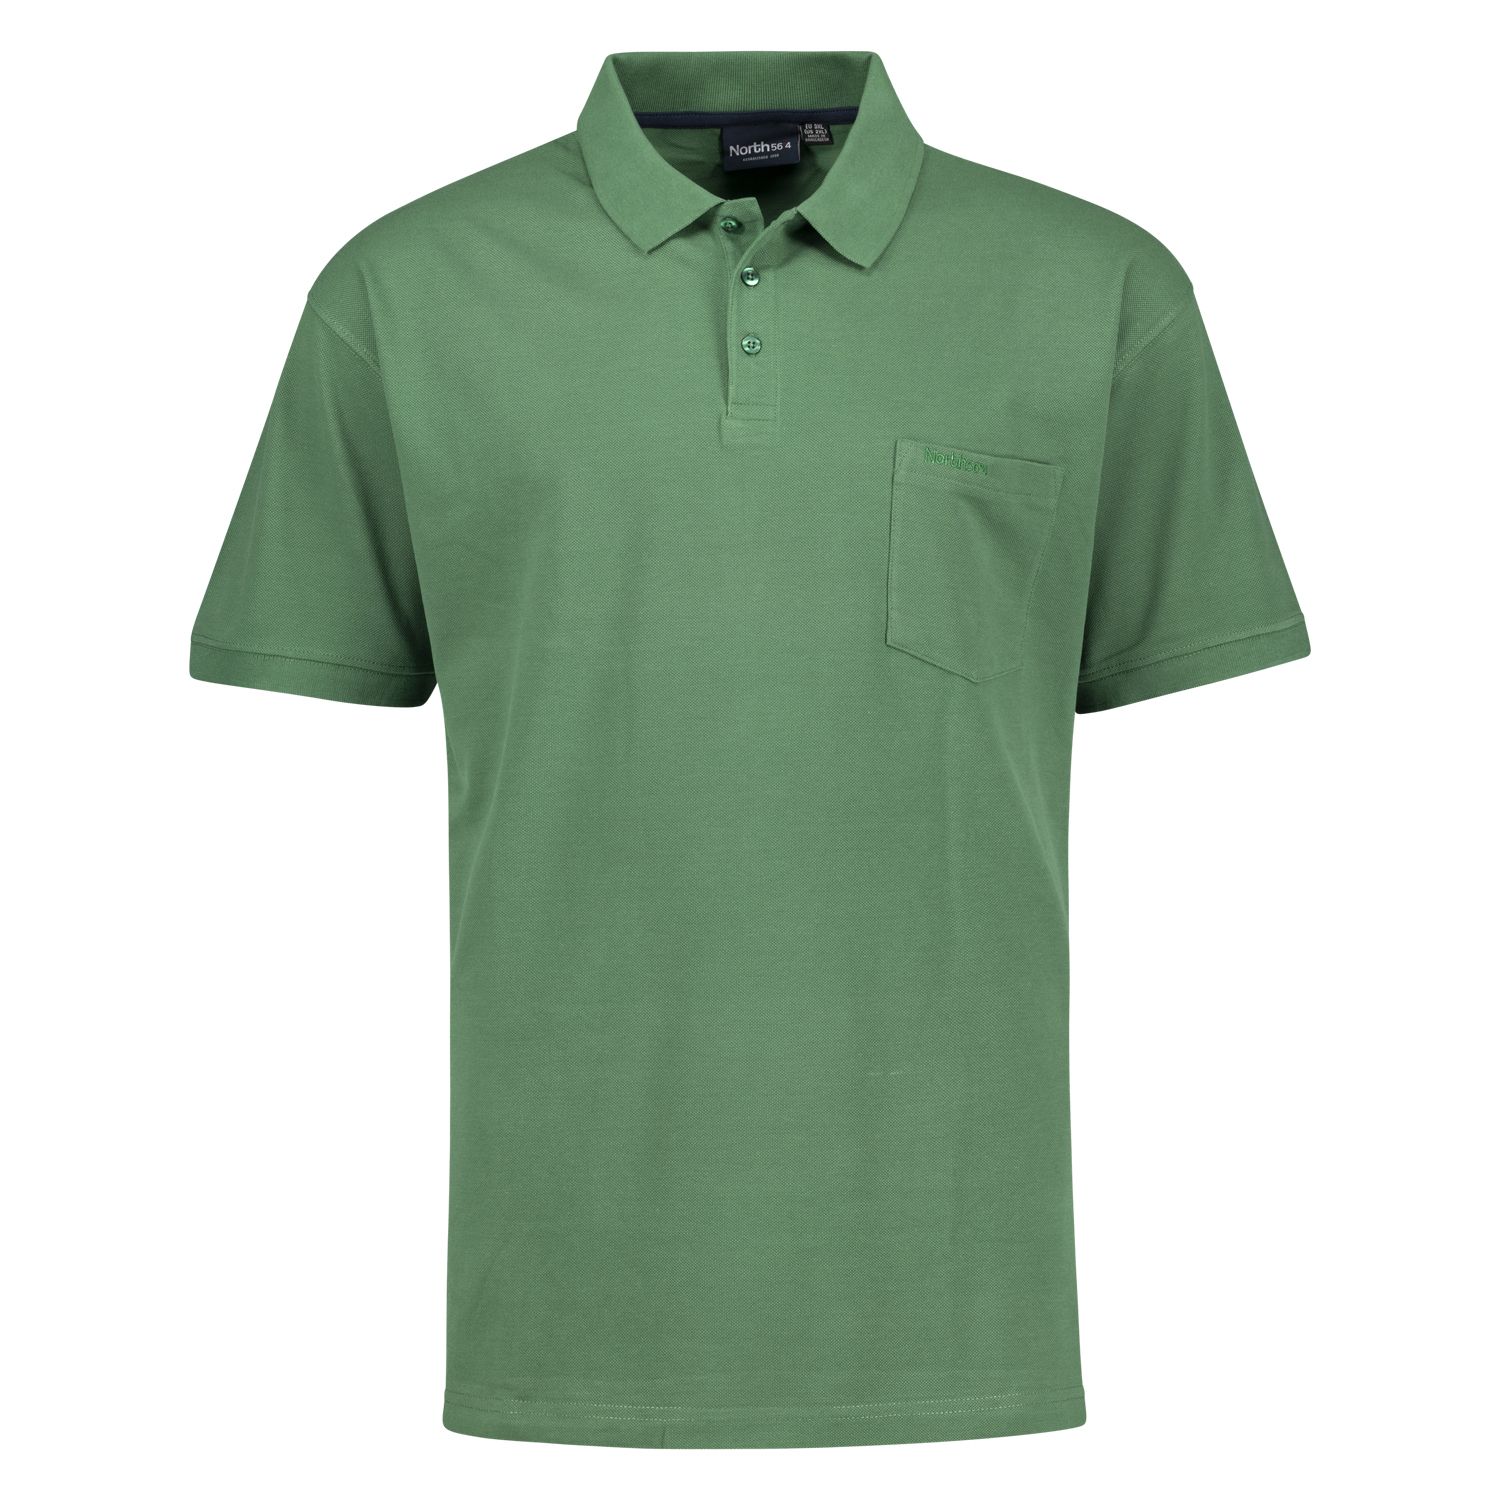 Green pique poloshirt for men by Greyes/North 56°4 in oversizes up to 8XL